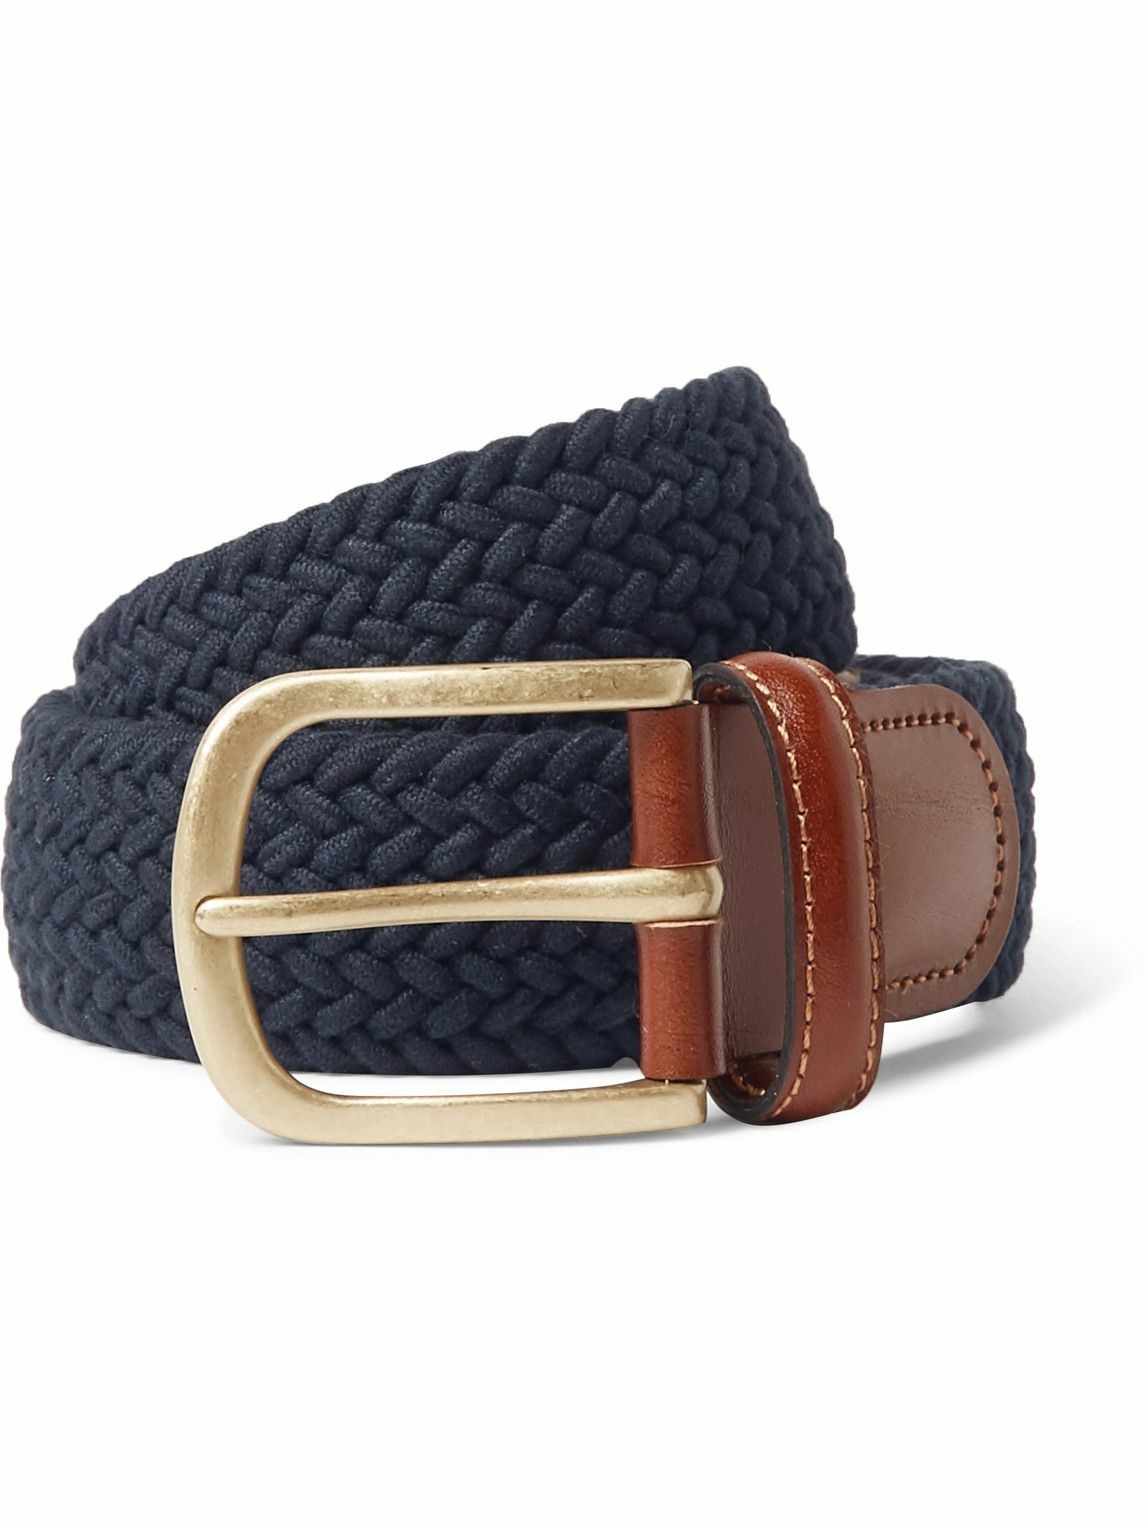 3.5cm Leather-Trimmed Woven Stretch-Cotton Belt